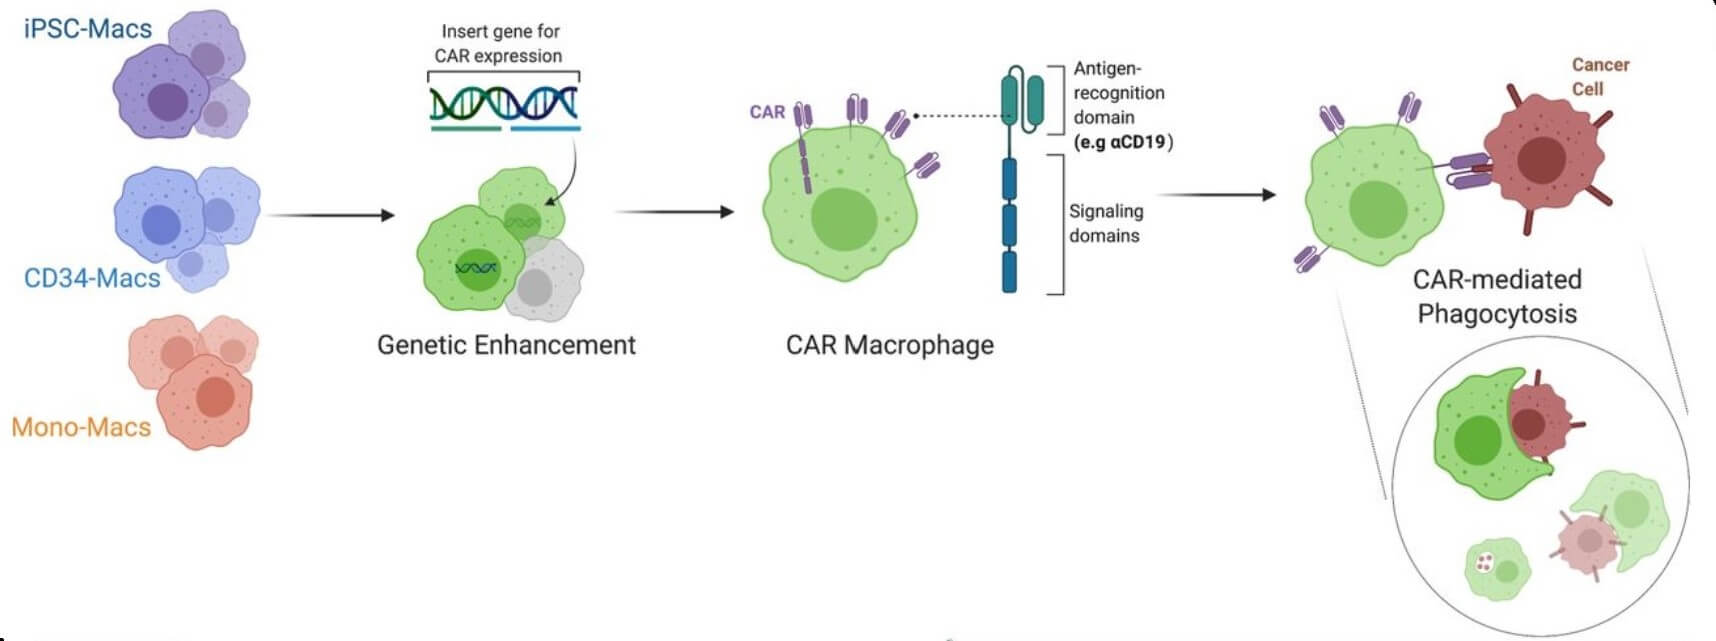 Macrophages derived from different sources can be genetically altered with CAR constructs.